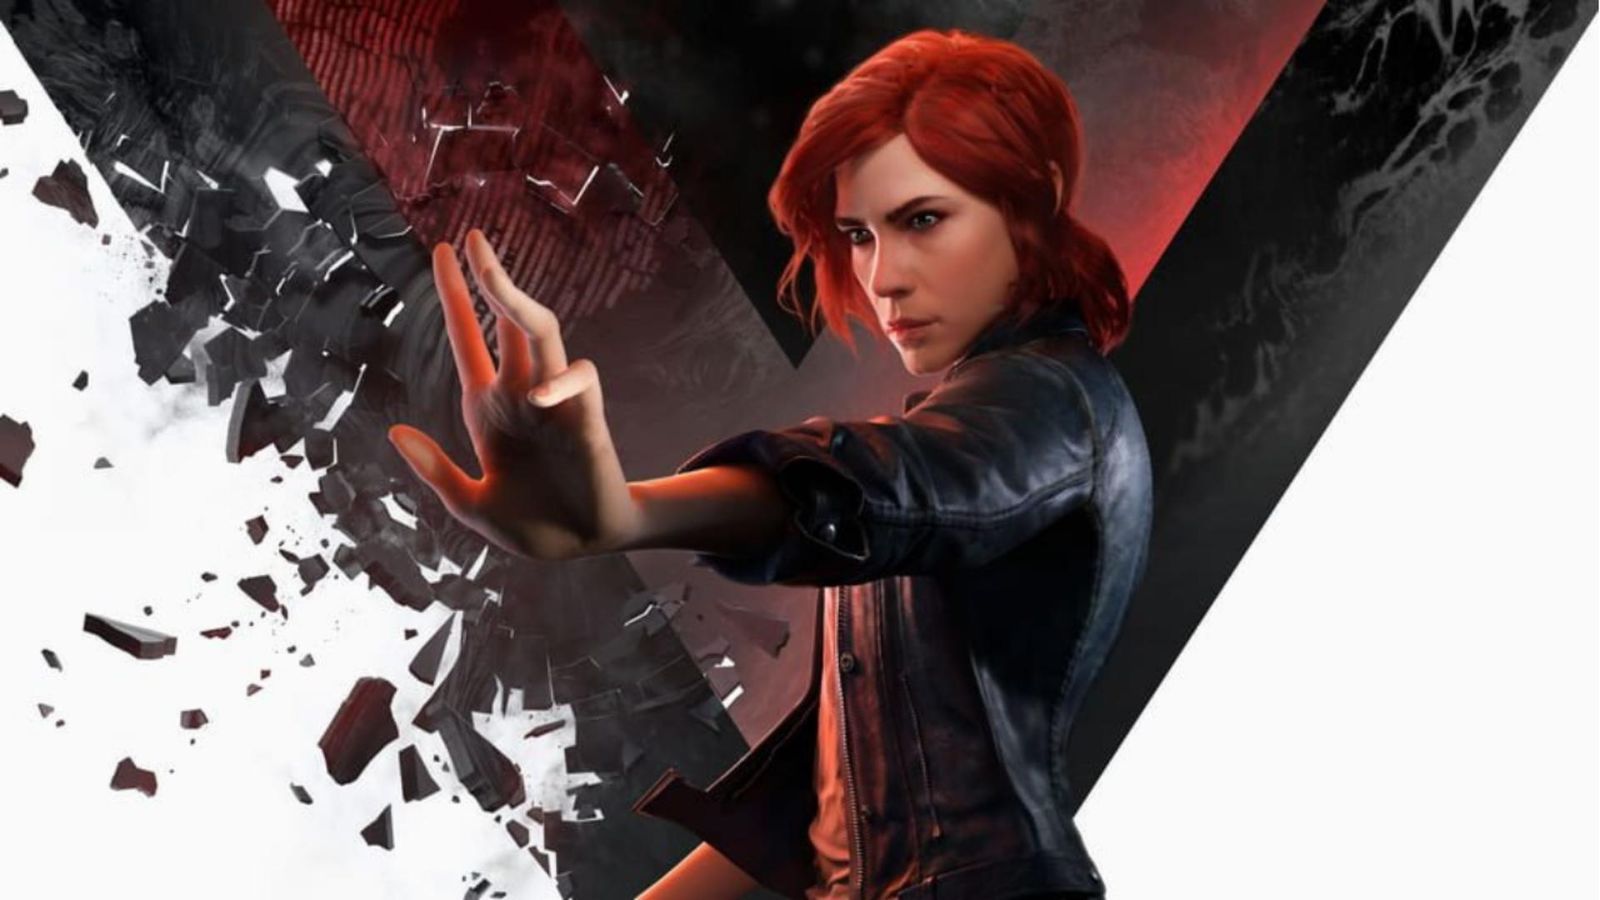 remedy entertainment acquires control